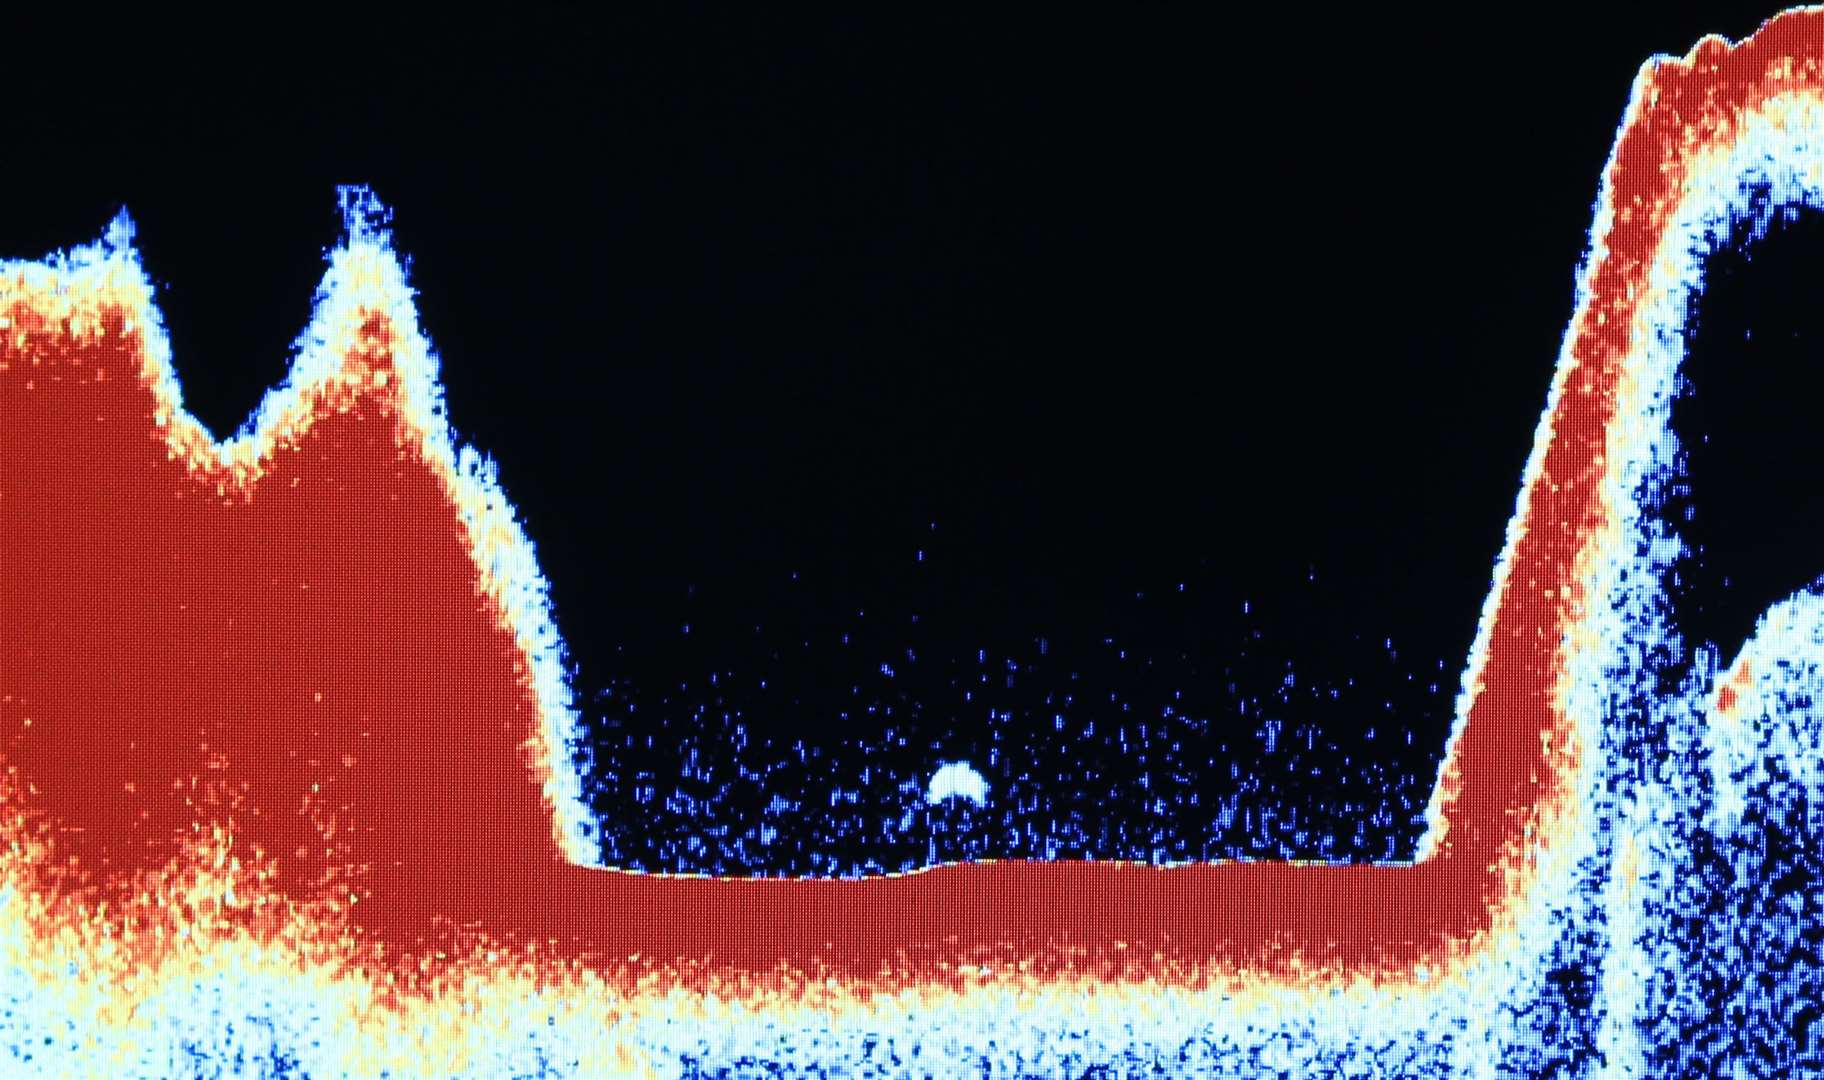 Sonar image taken at Loch Ness by tour bboat skipper Ronald Mackenzie....pic Peter Jolly